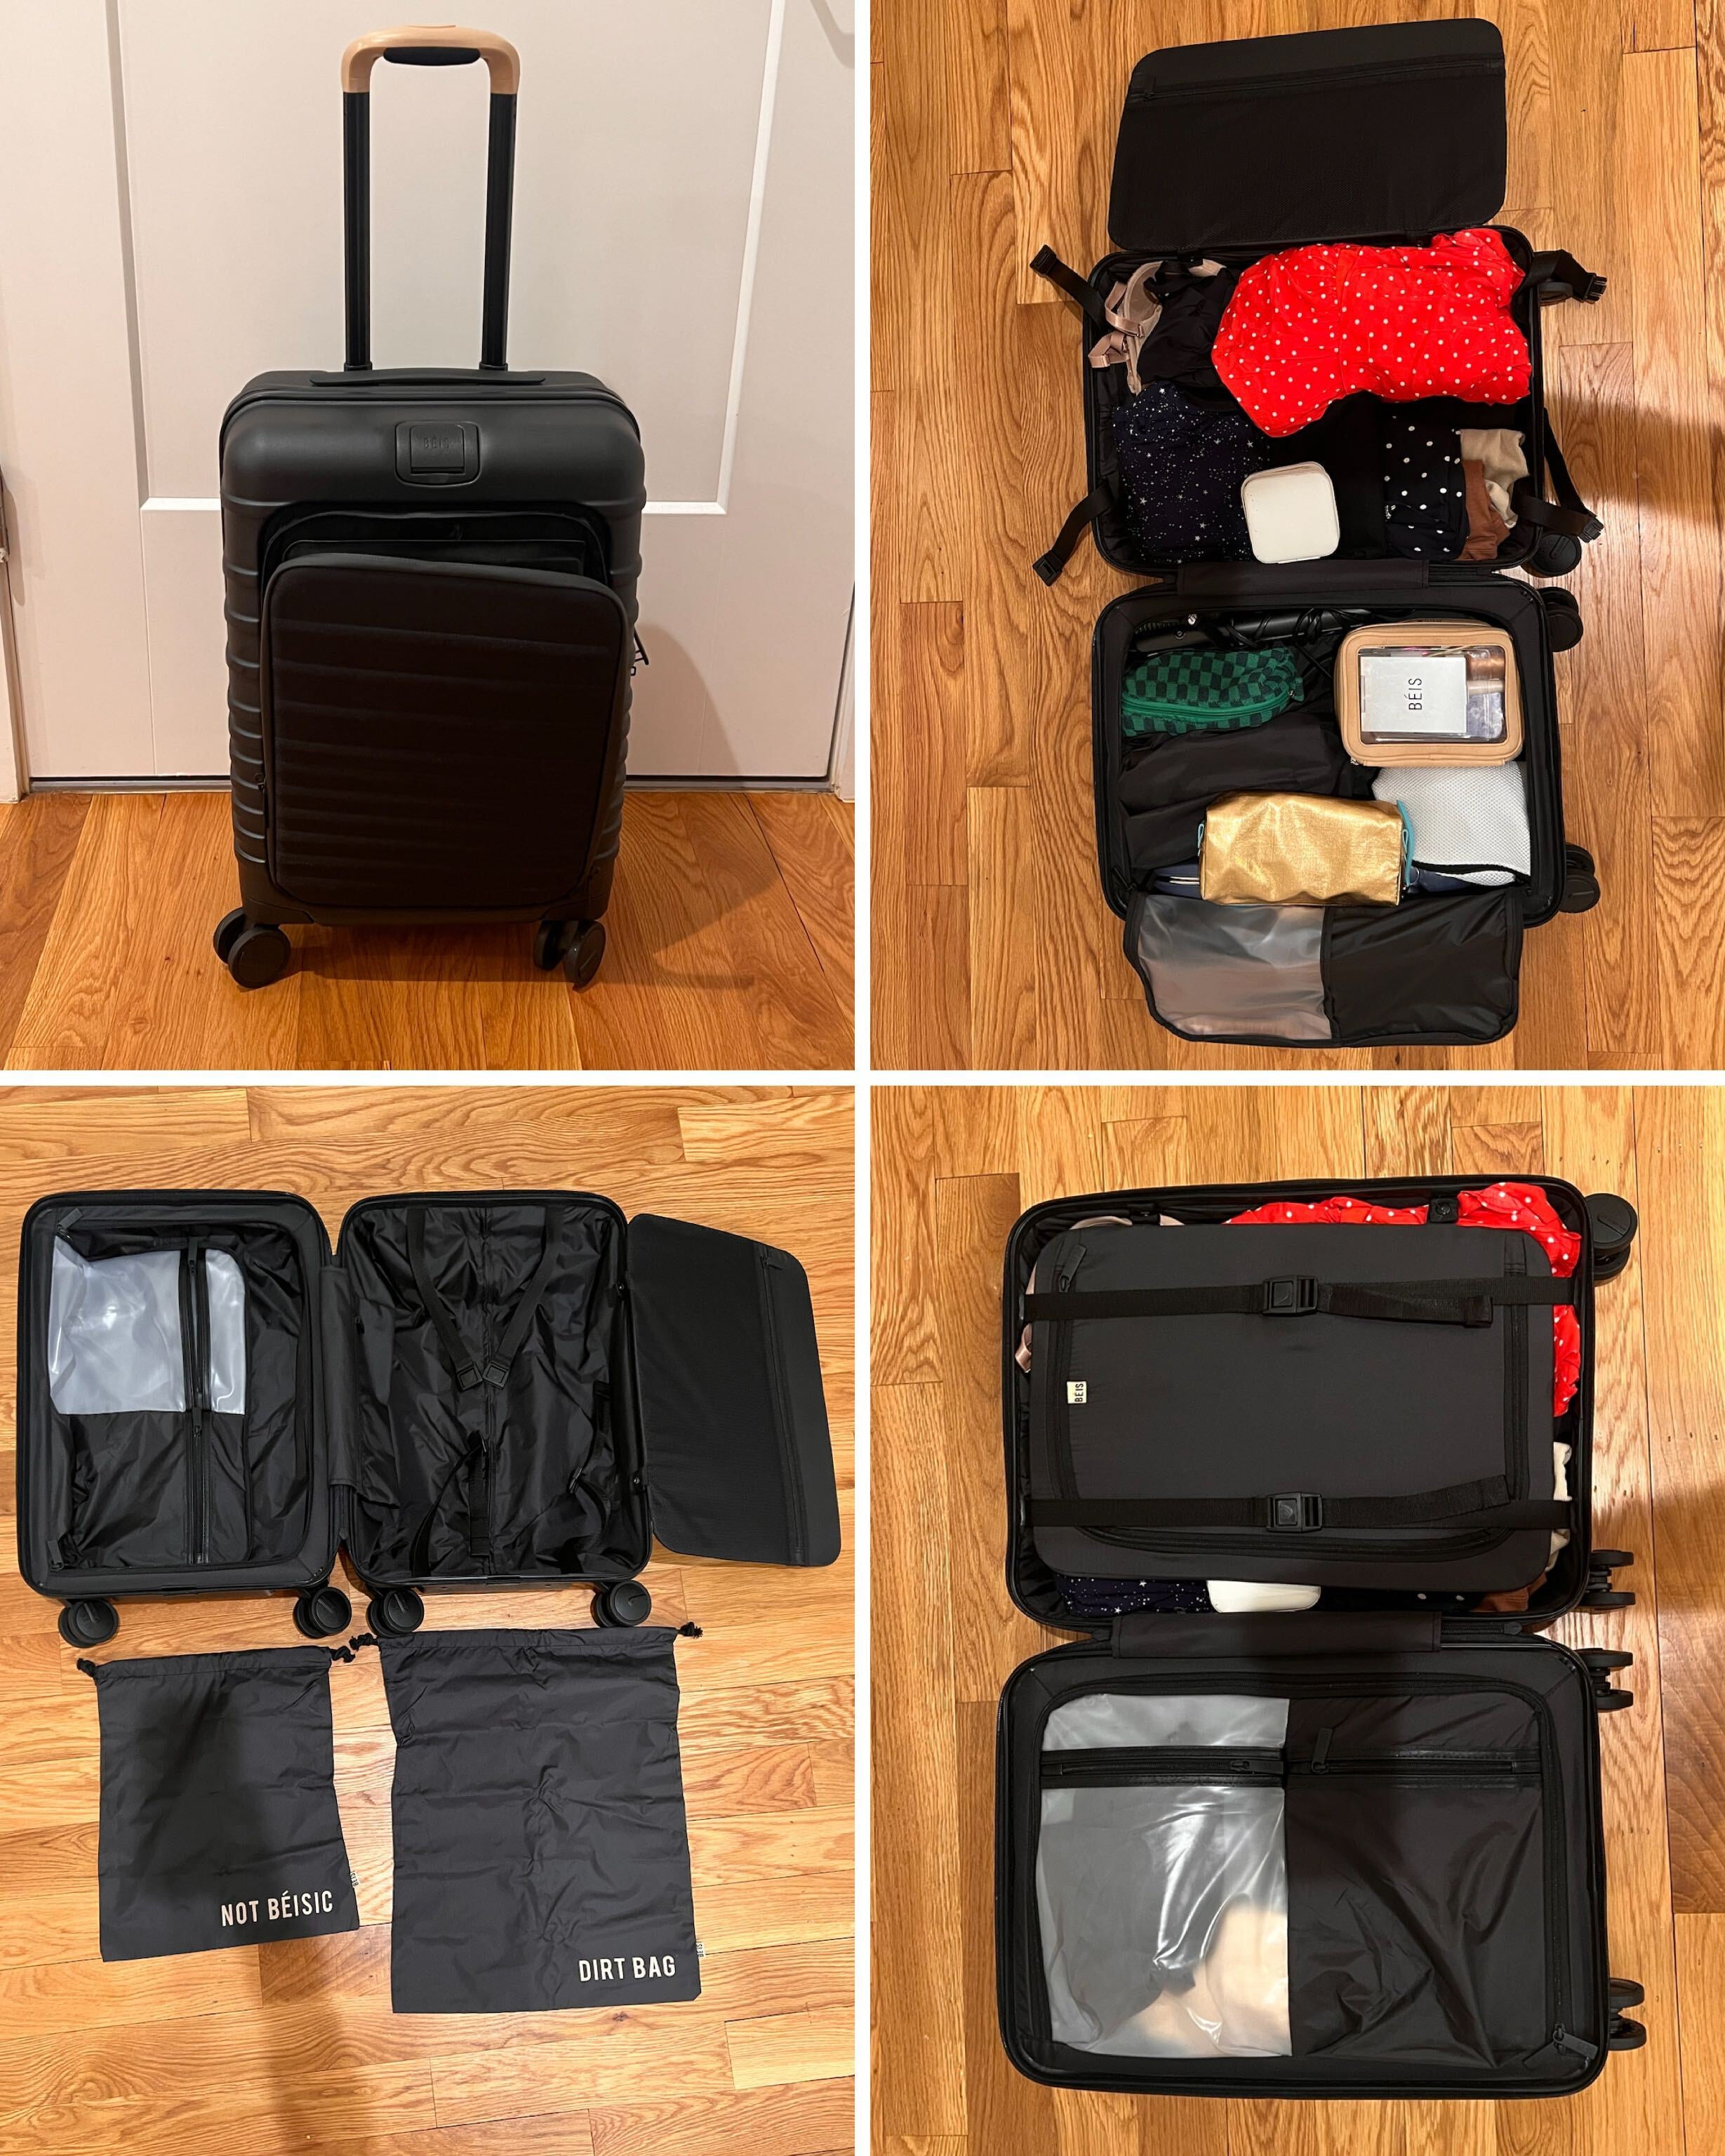 Review: This Beis Commuter Tote Bag Organizes Everything You Need